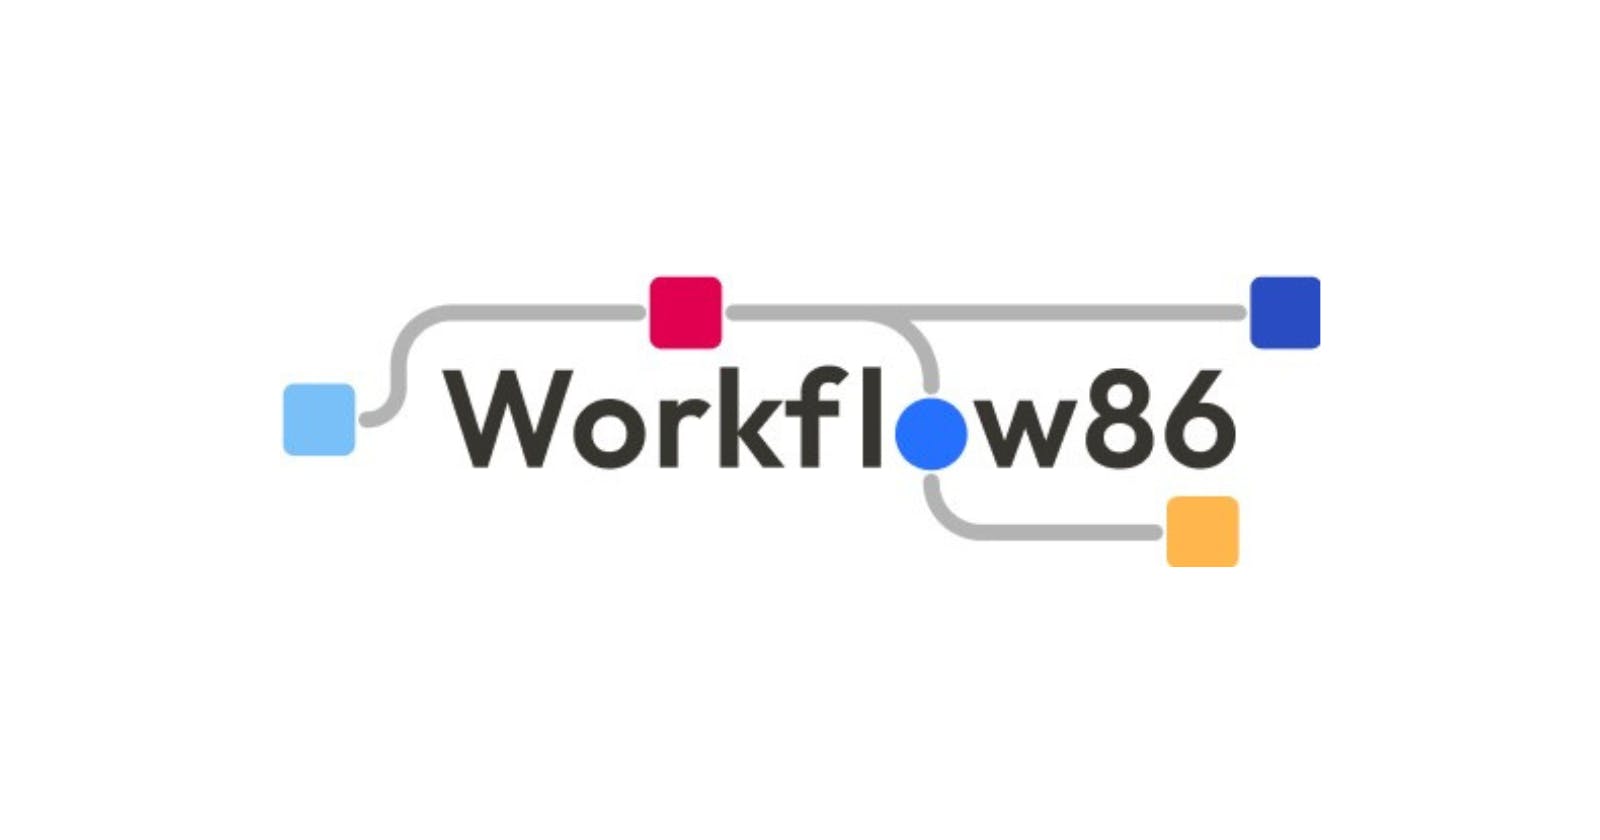 Workflow86: Empowering Teams to Scale Their Operations with Automation